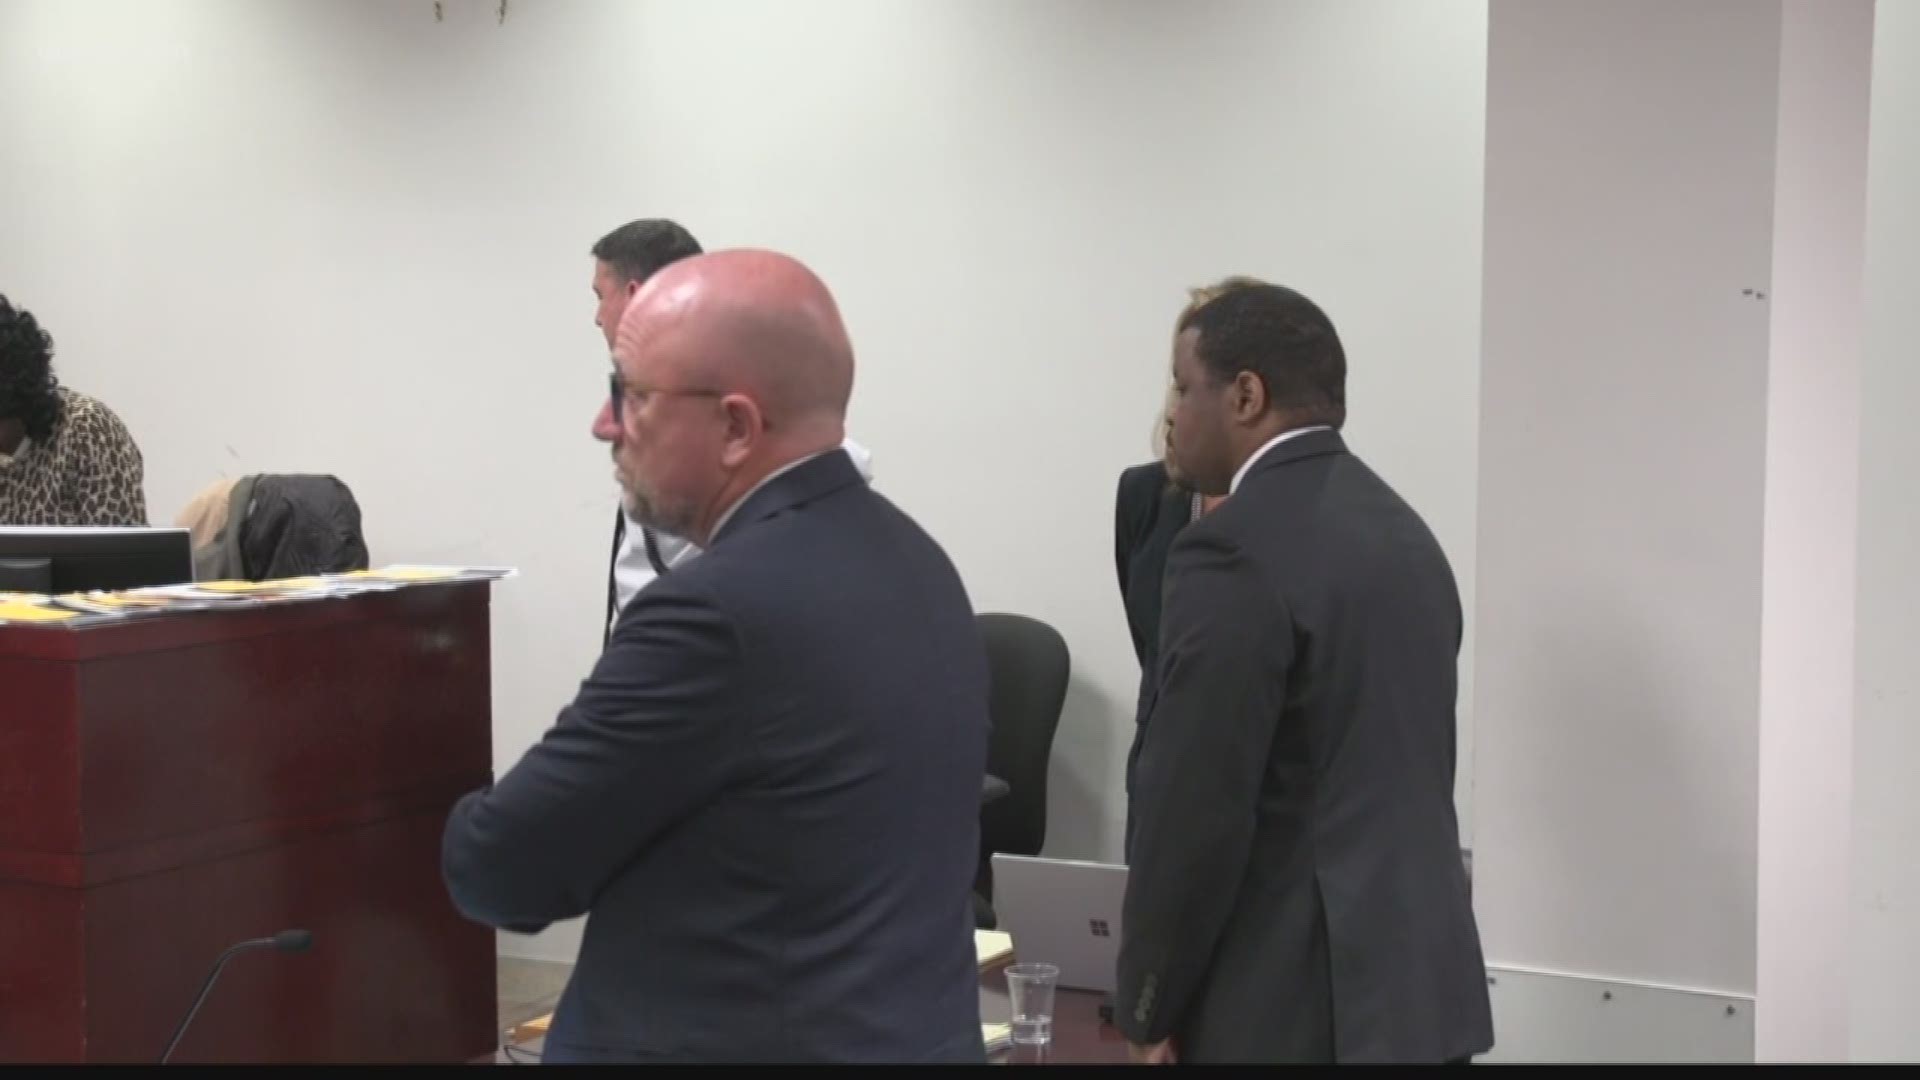 He was found guilty of murdering and raping 9-year-old Felecia Williams. https://on.wtsp.com/2mN4uPq